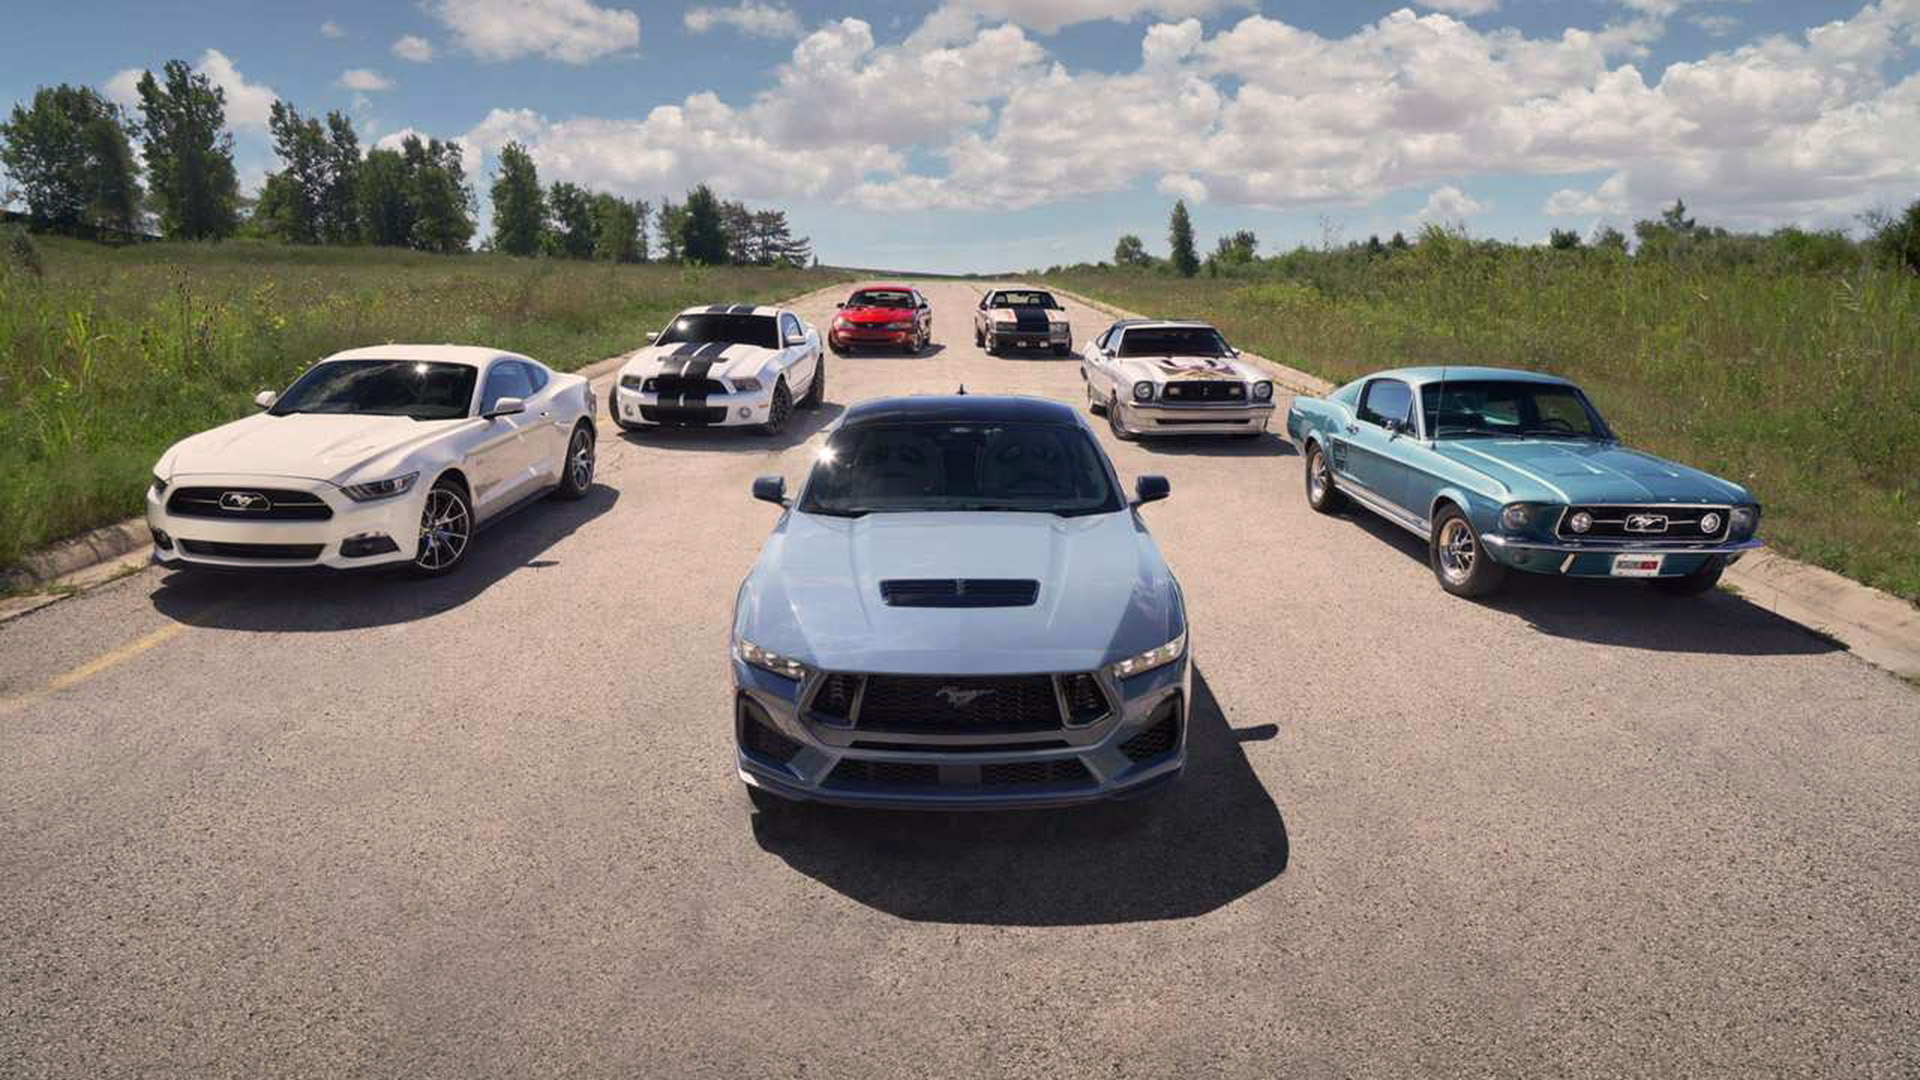 All Mustangs in one photo.  Nearly 60 years of classicism leading up to the Pony Car concept, cars weren't quite as big as Muscle Cars in the 1960s.